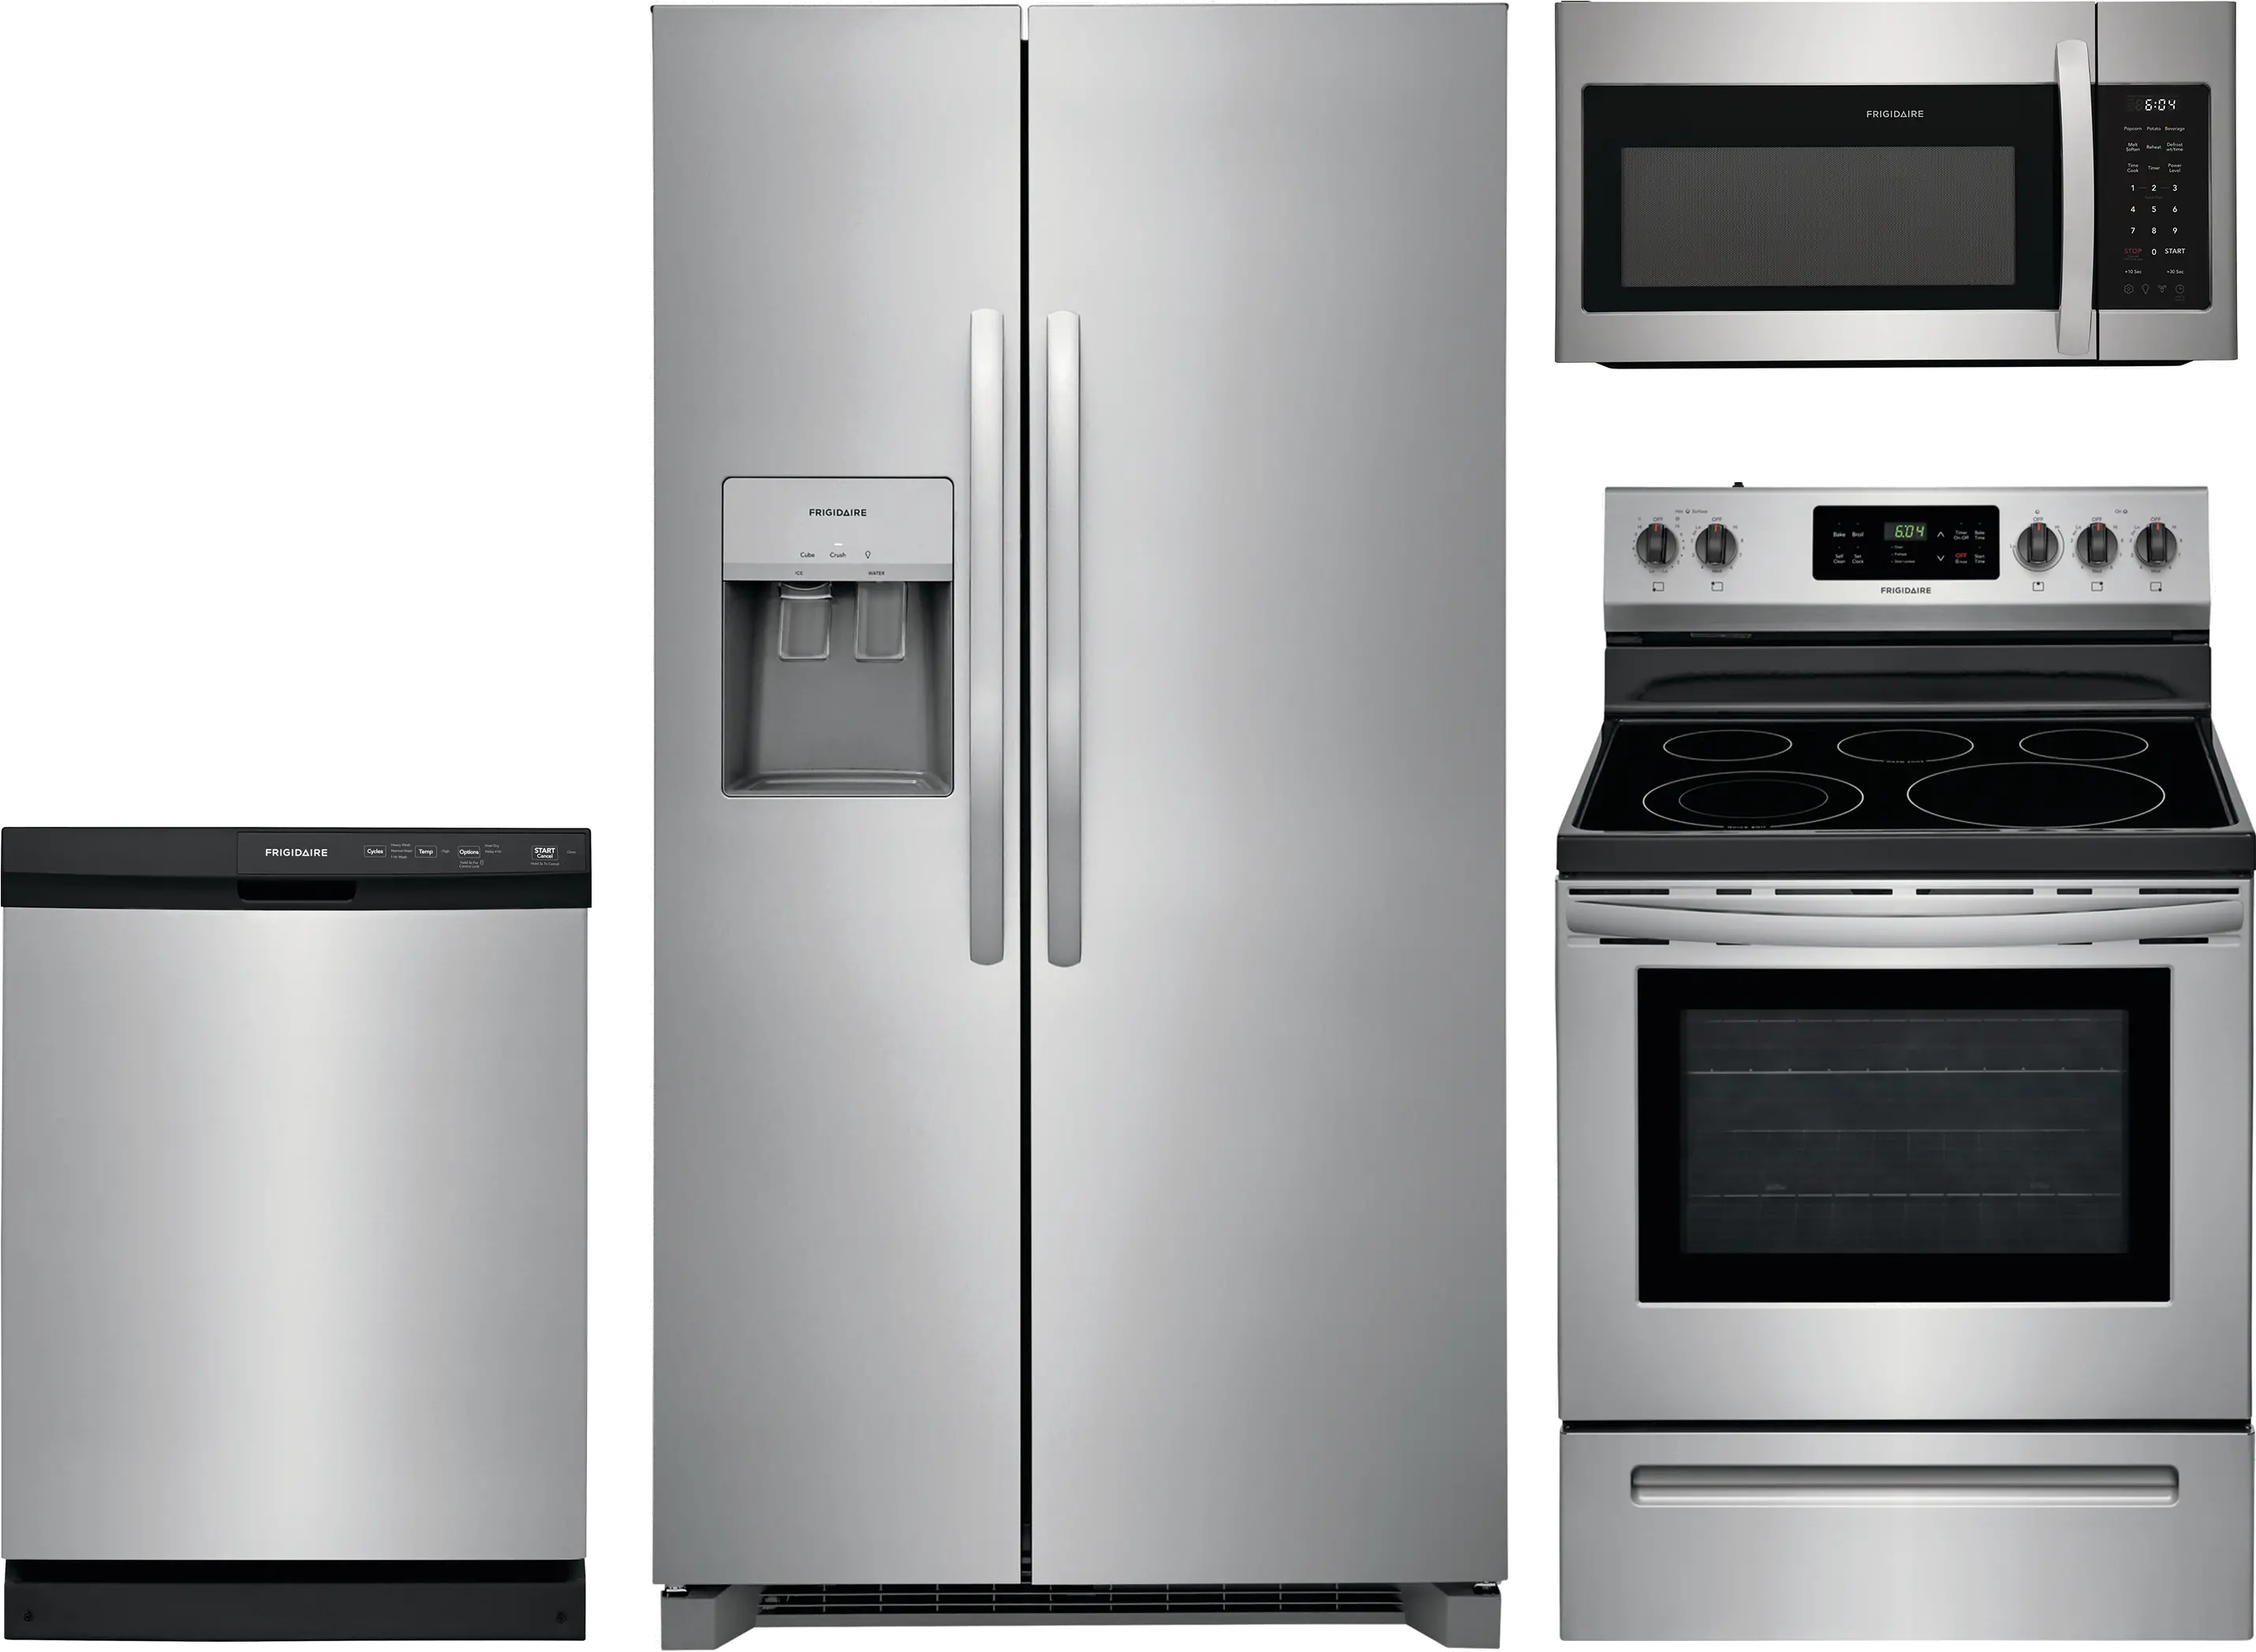 https://static.rcwilley.com/products/112965600/Frigidaire-4-Piece-Electric-Kitchen-Appliance-Package---Stainless-Steel-rcwilley-image1.webp